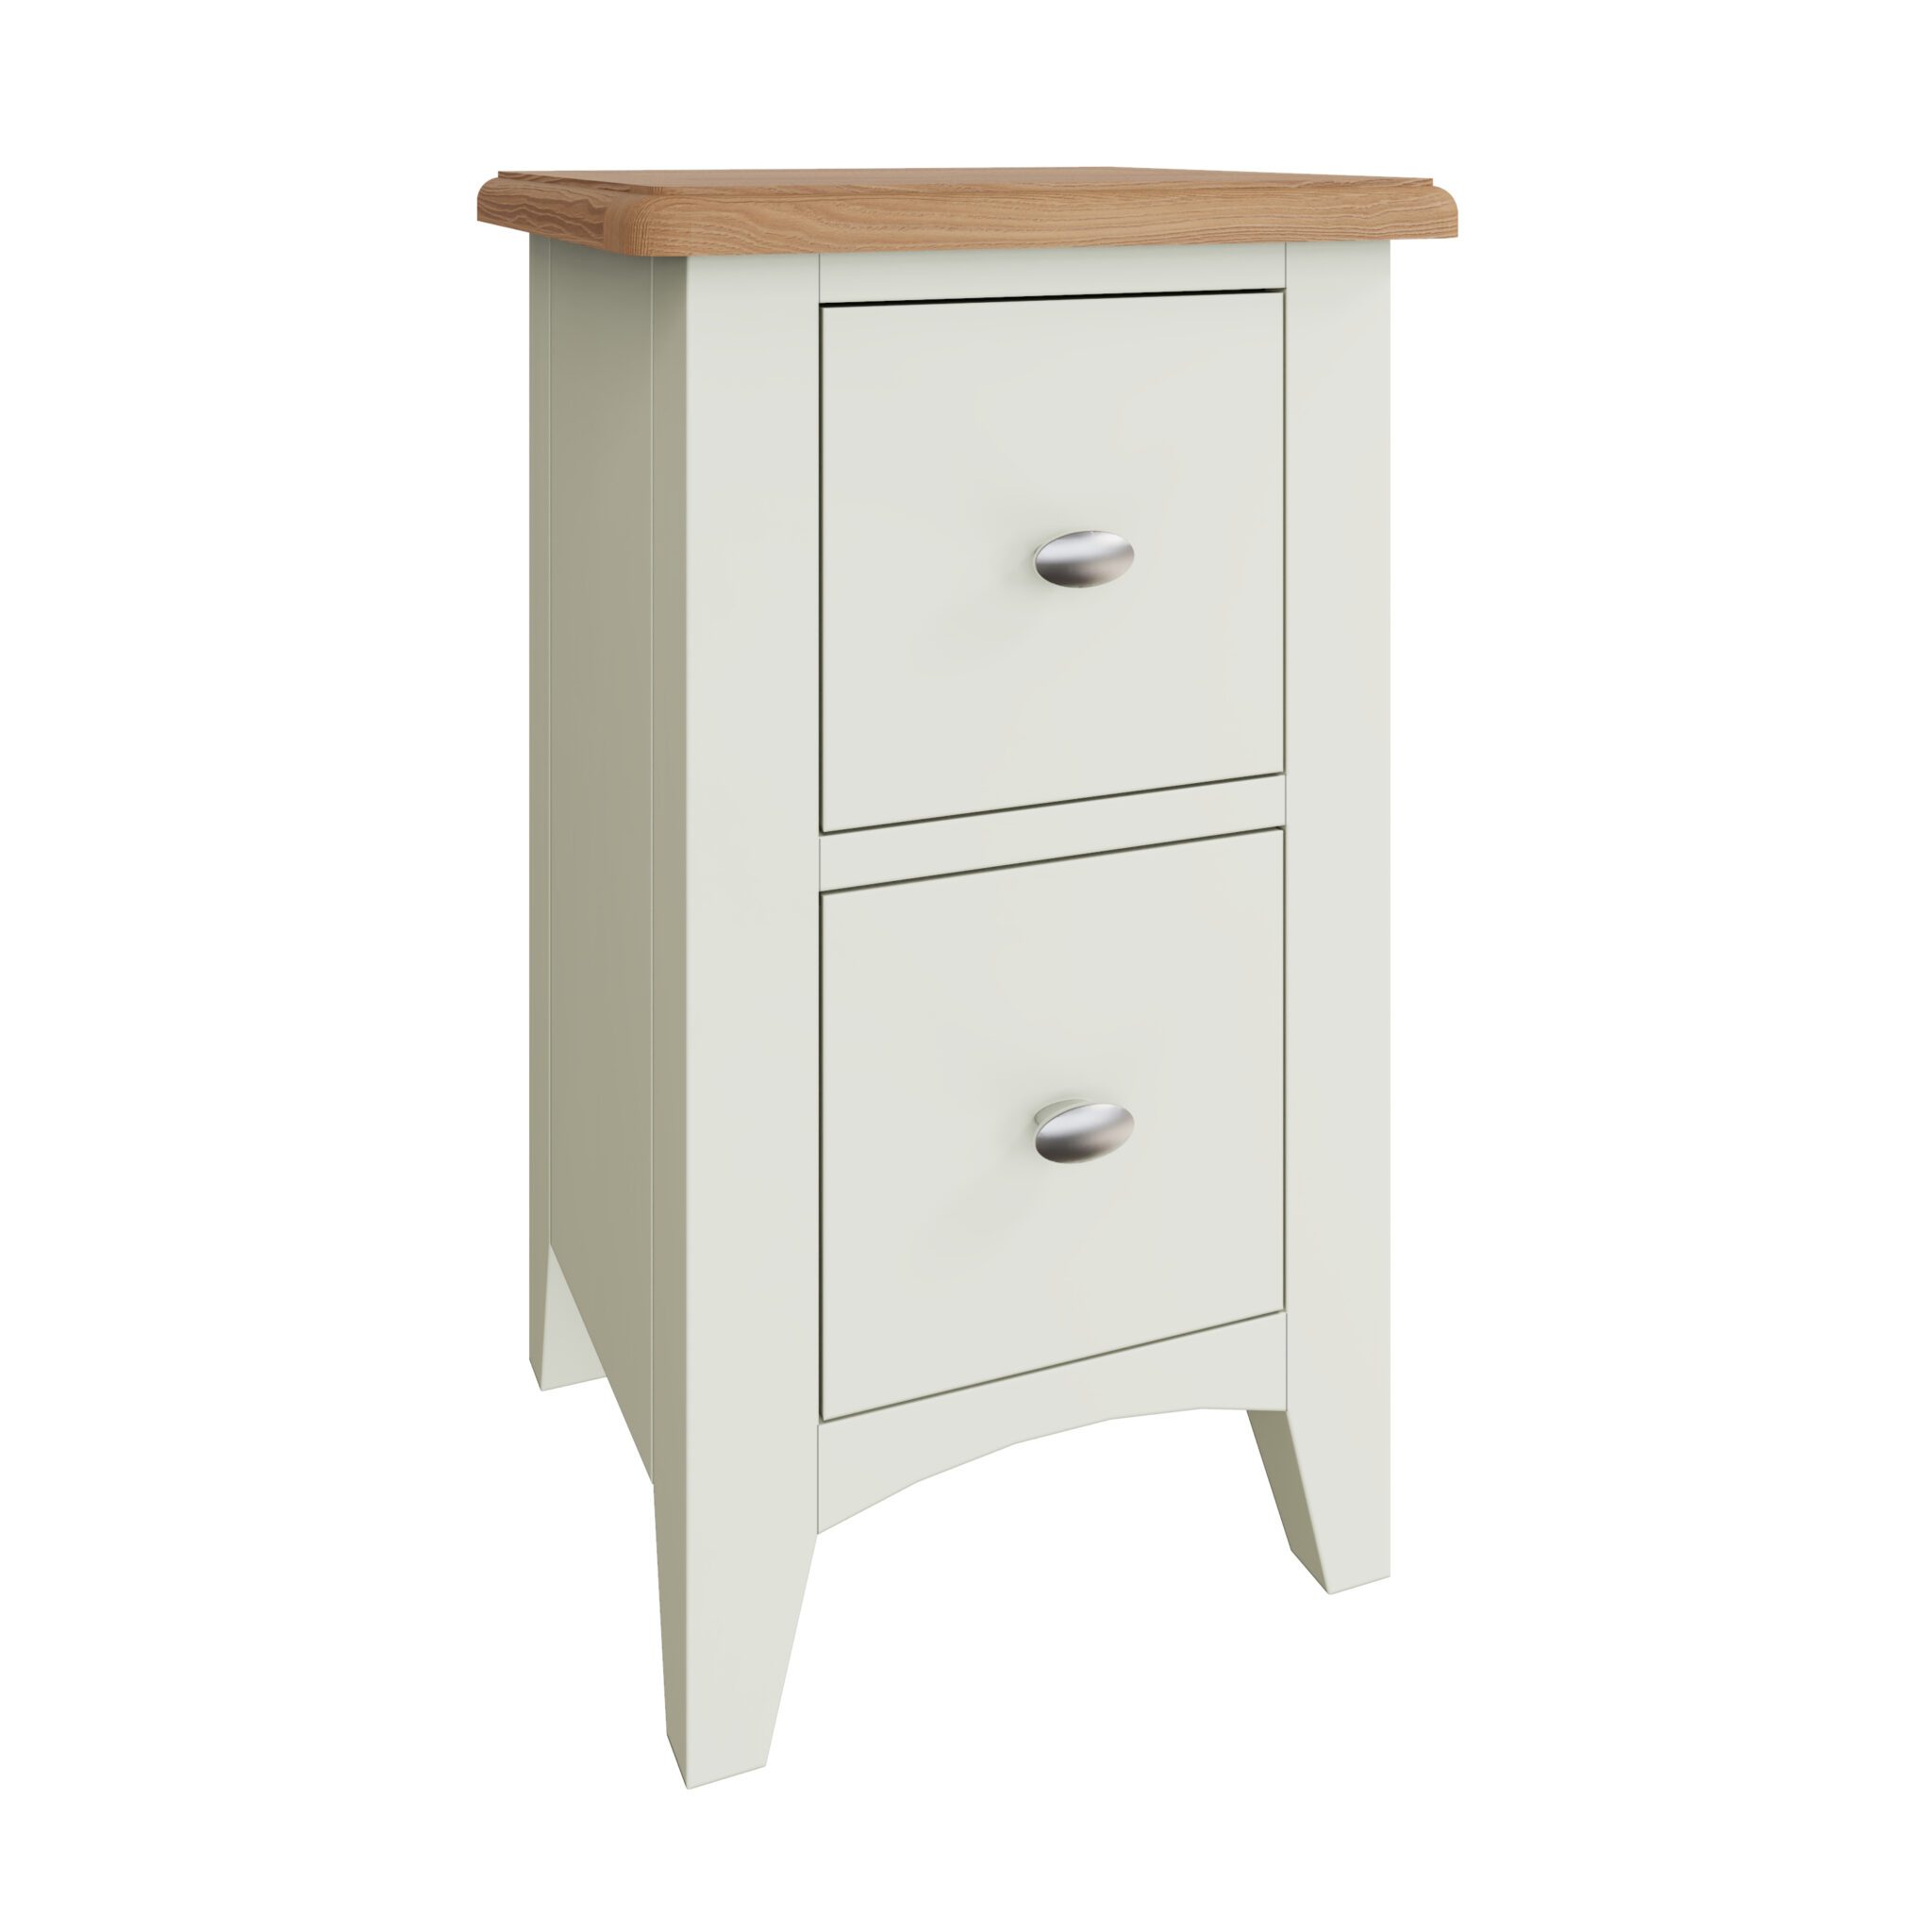 Gala Small Bedside Cabinet (White Painted)